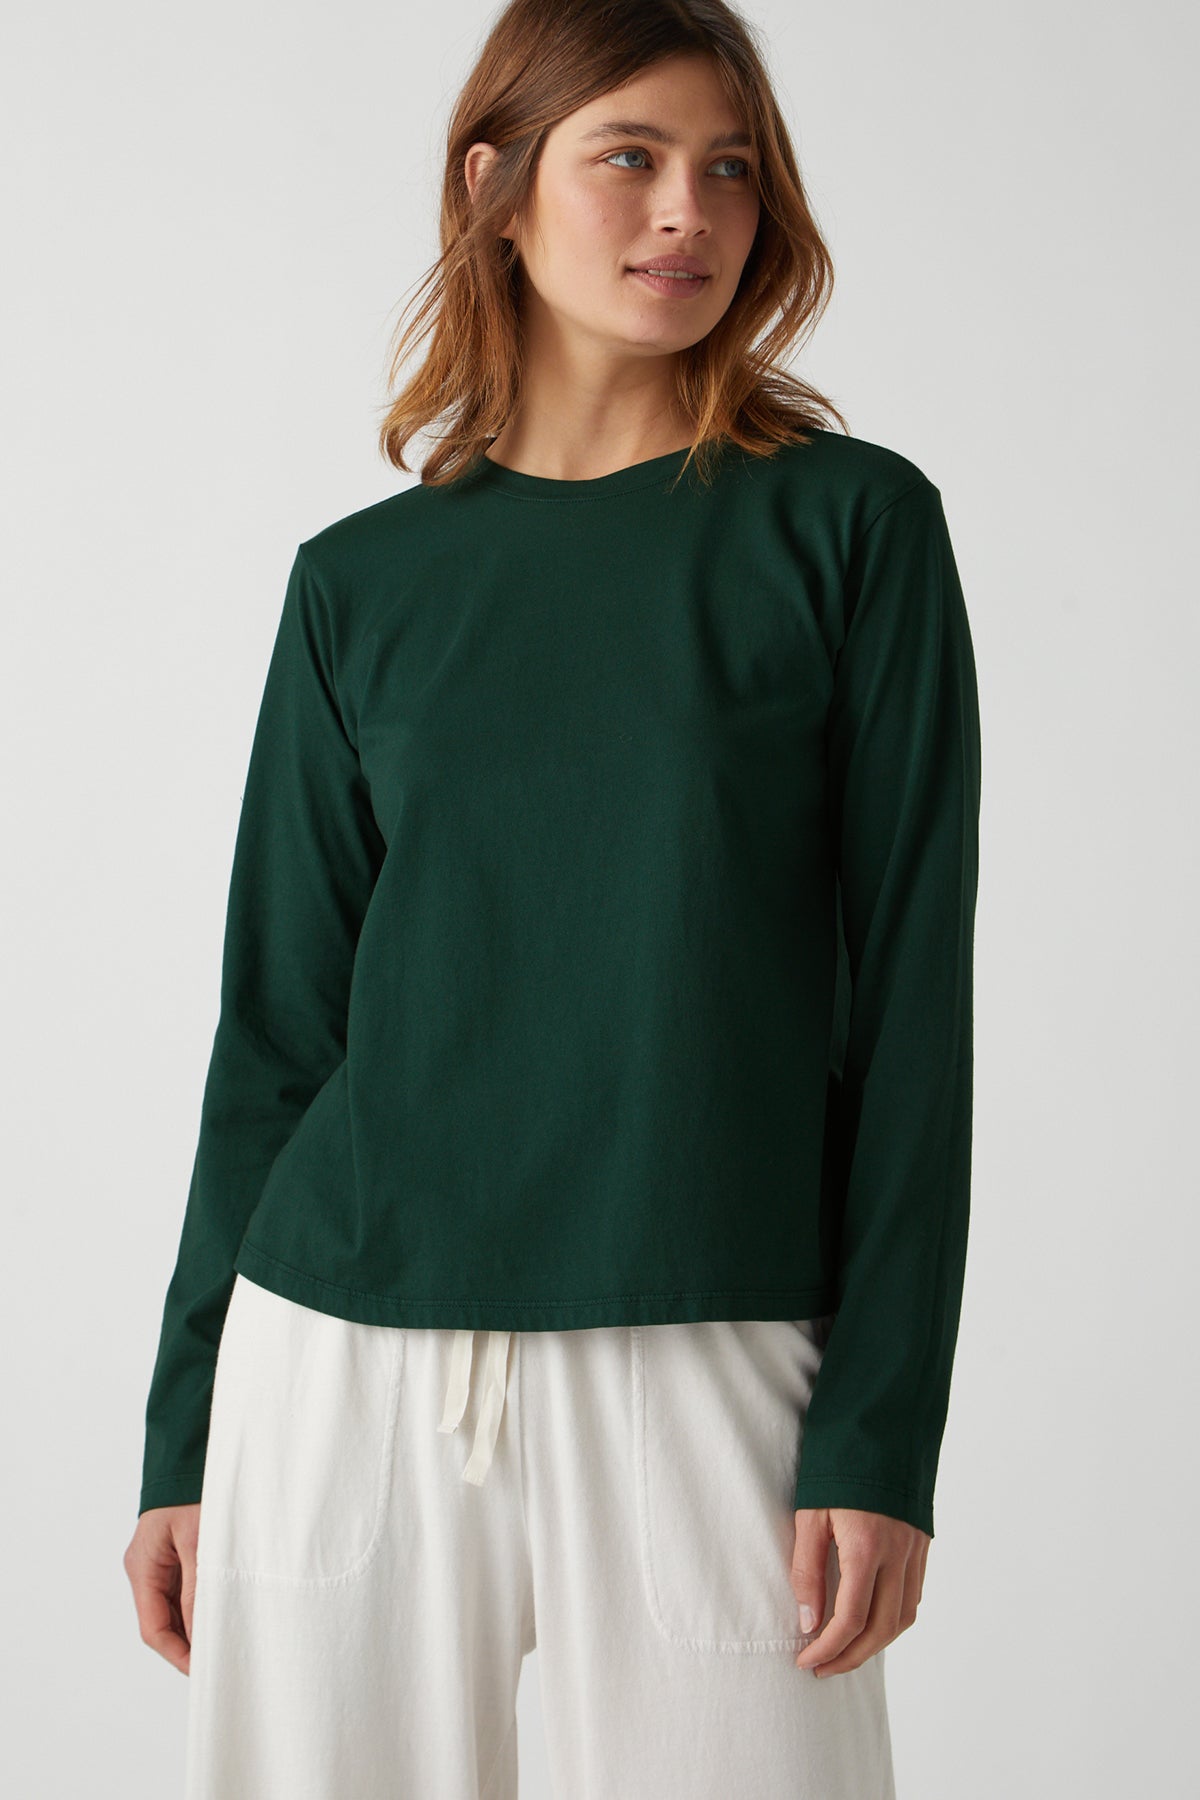   Vicente Tee in forest green front 